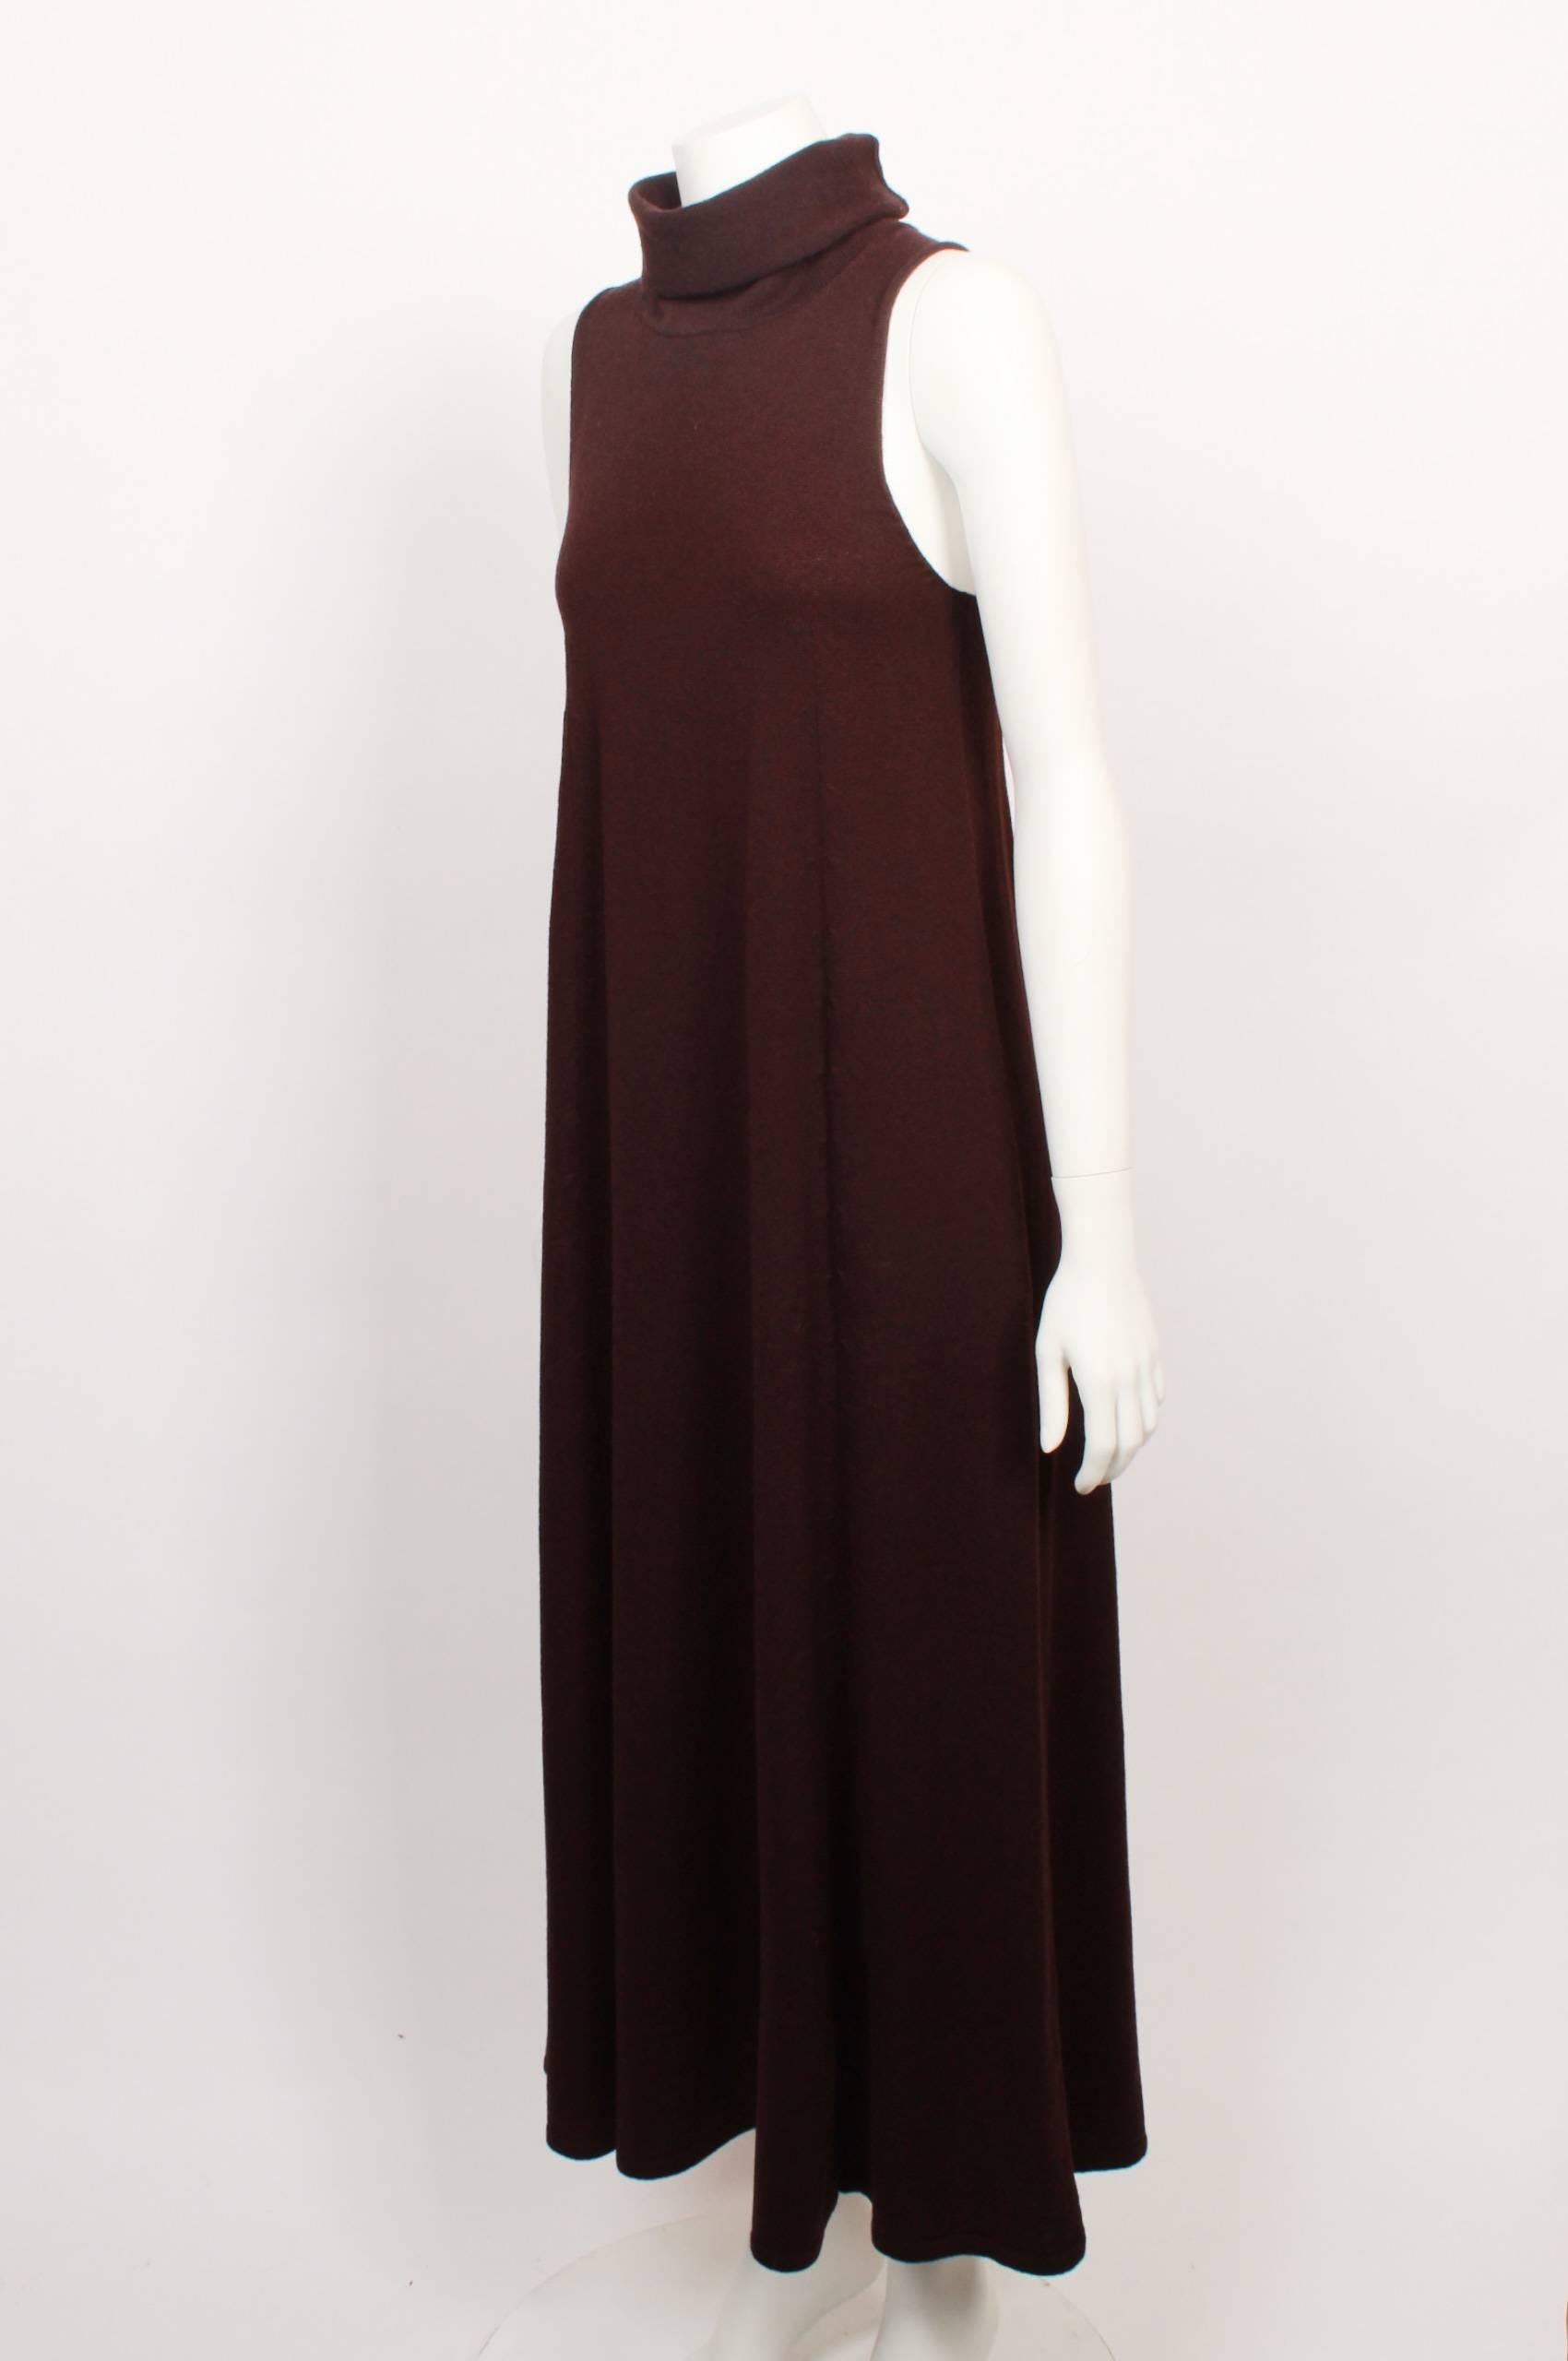 Yohji Yamamoto sleeveless dress with roll neck collar and flared hemline.
3/4 length in rich burgundy wool knit. Made in Japan. Size M.